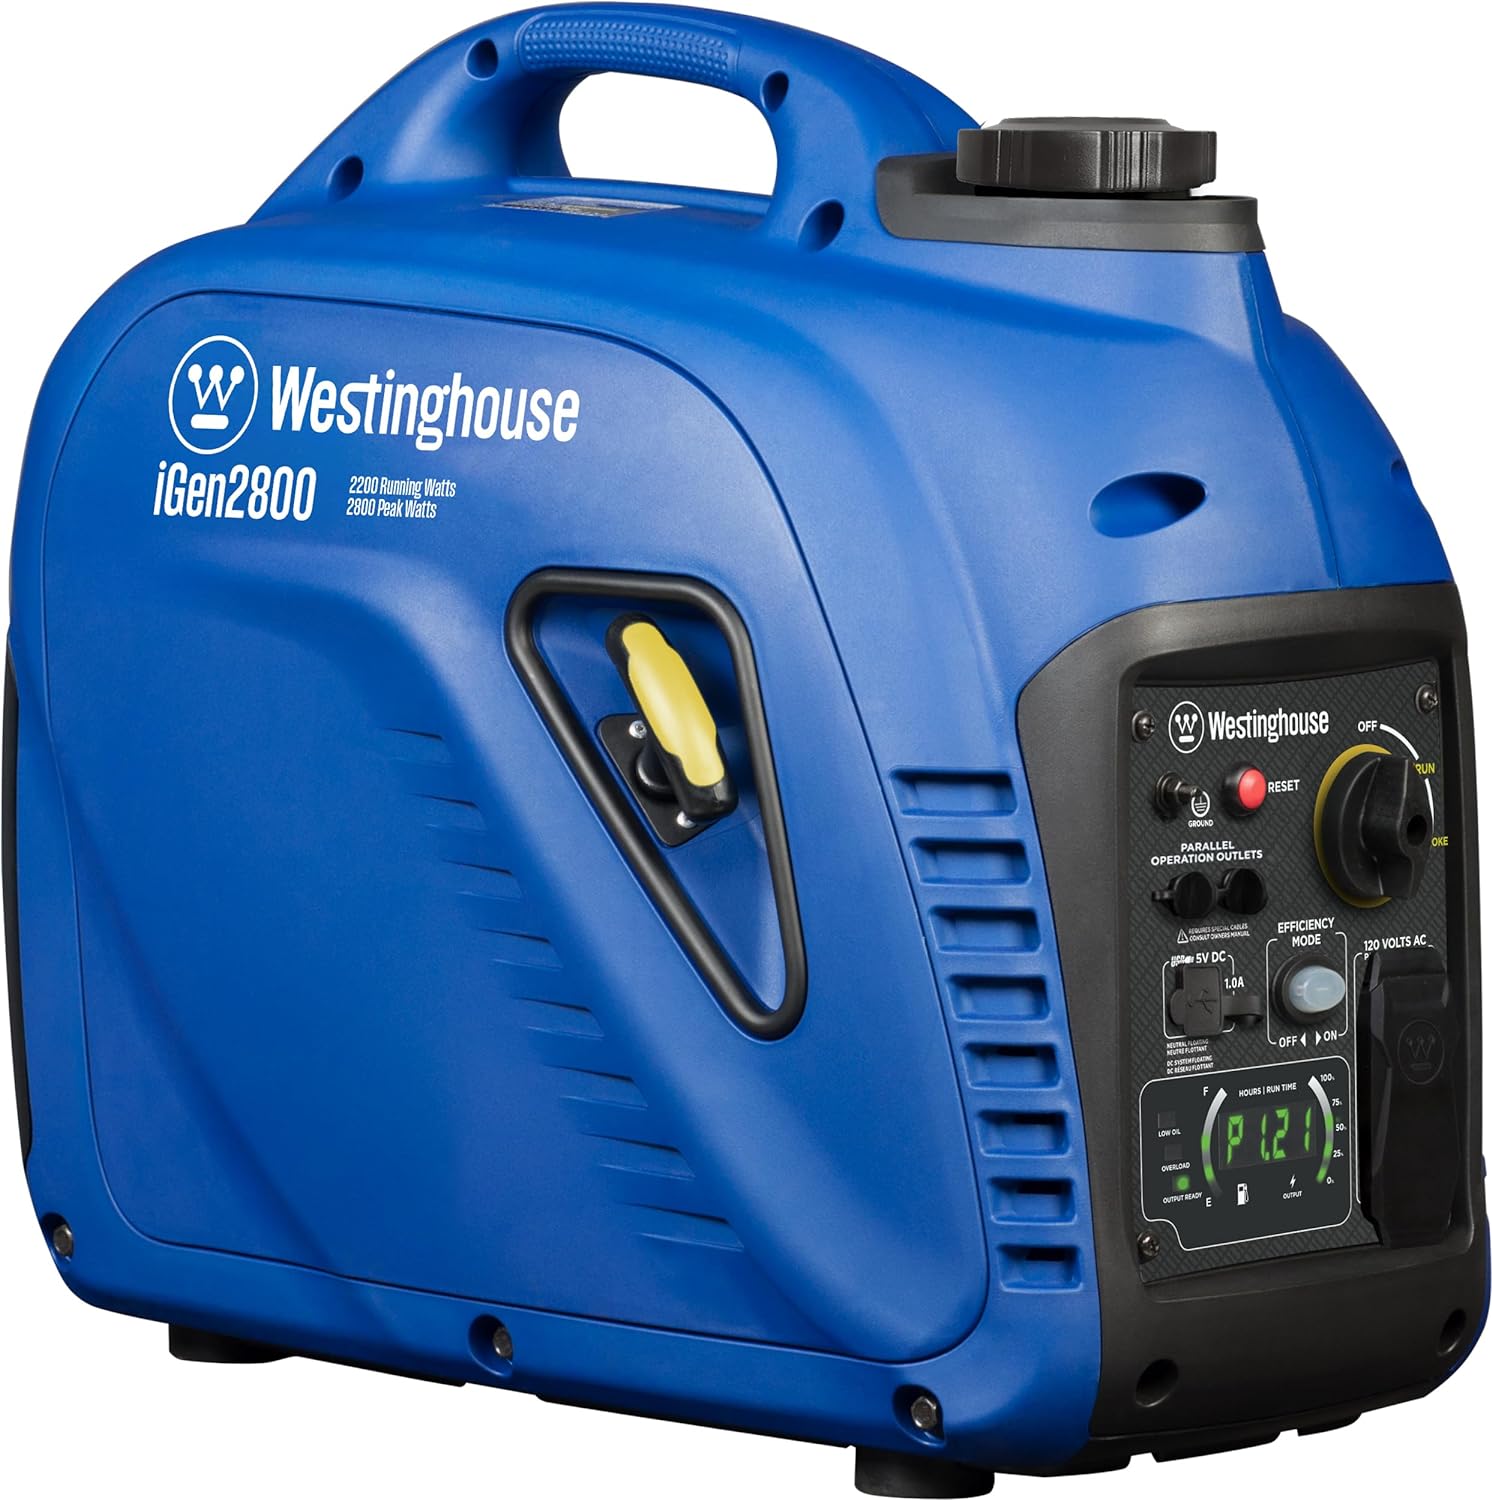 Westinghouse iGen2800 Review: The Ultimate Lightweight Inverter Generator for Home and Outdoor Use